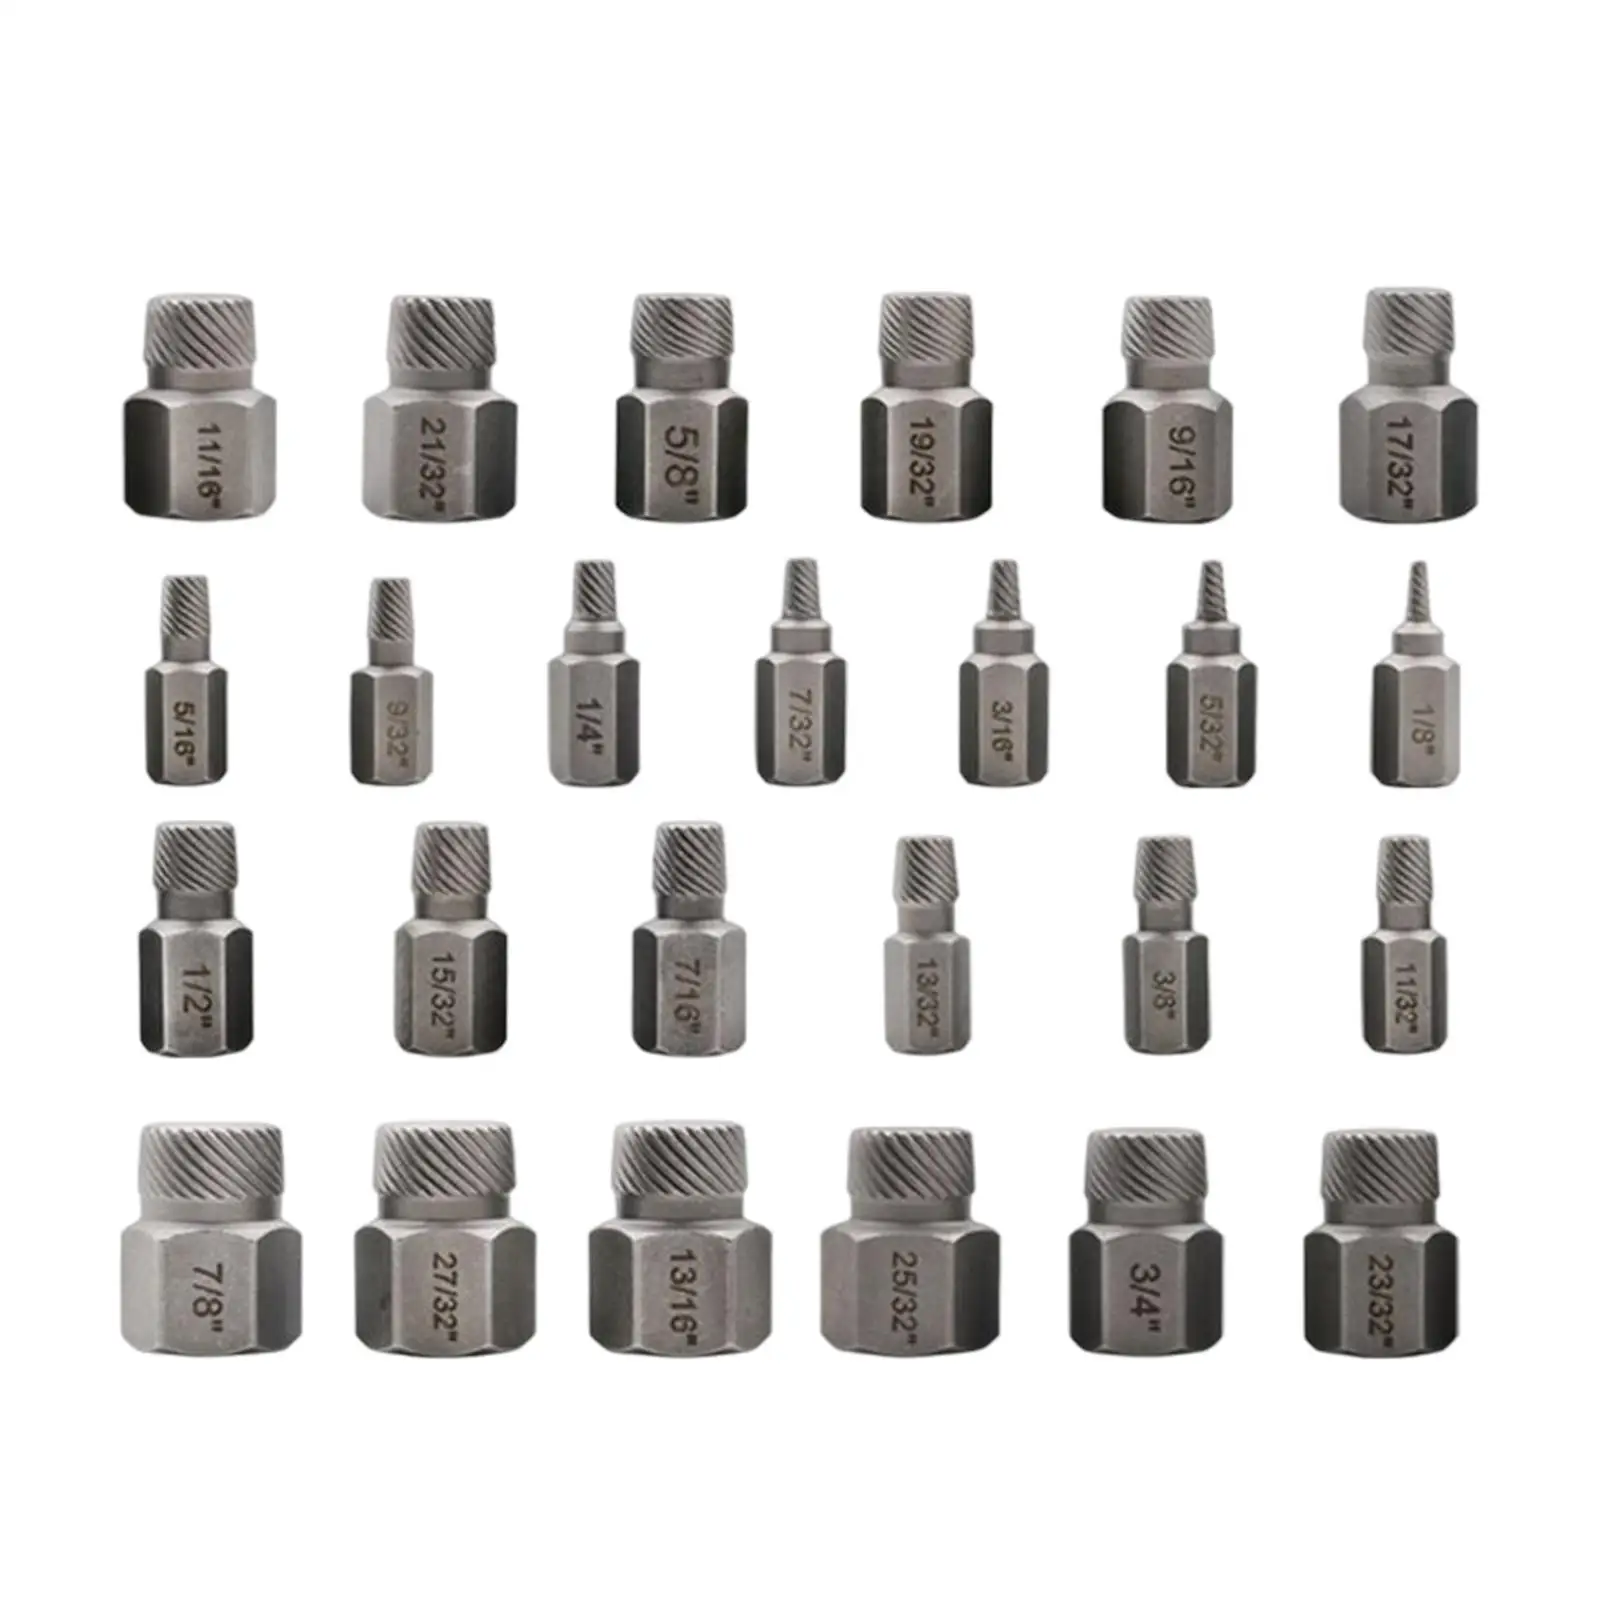 25 Pieces Steel Damaged Screw Extractor Bolt Extractor Set Stripped Bolts Remover Nut Remover for Removing Damaged Bolts Screws